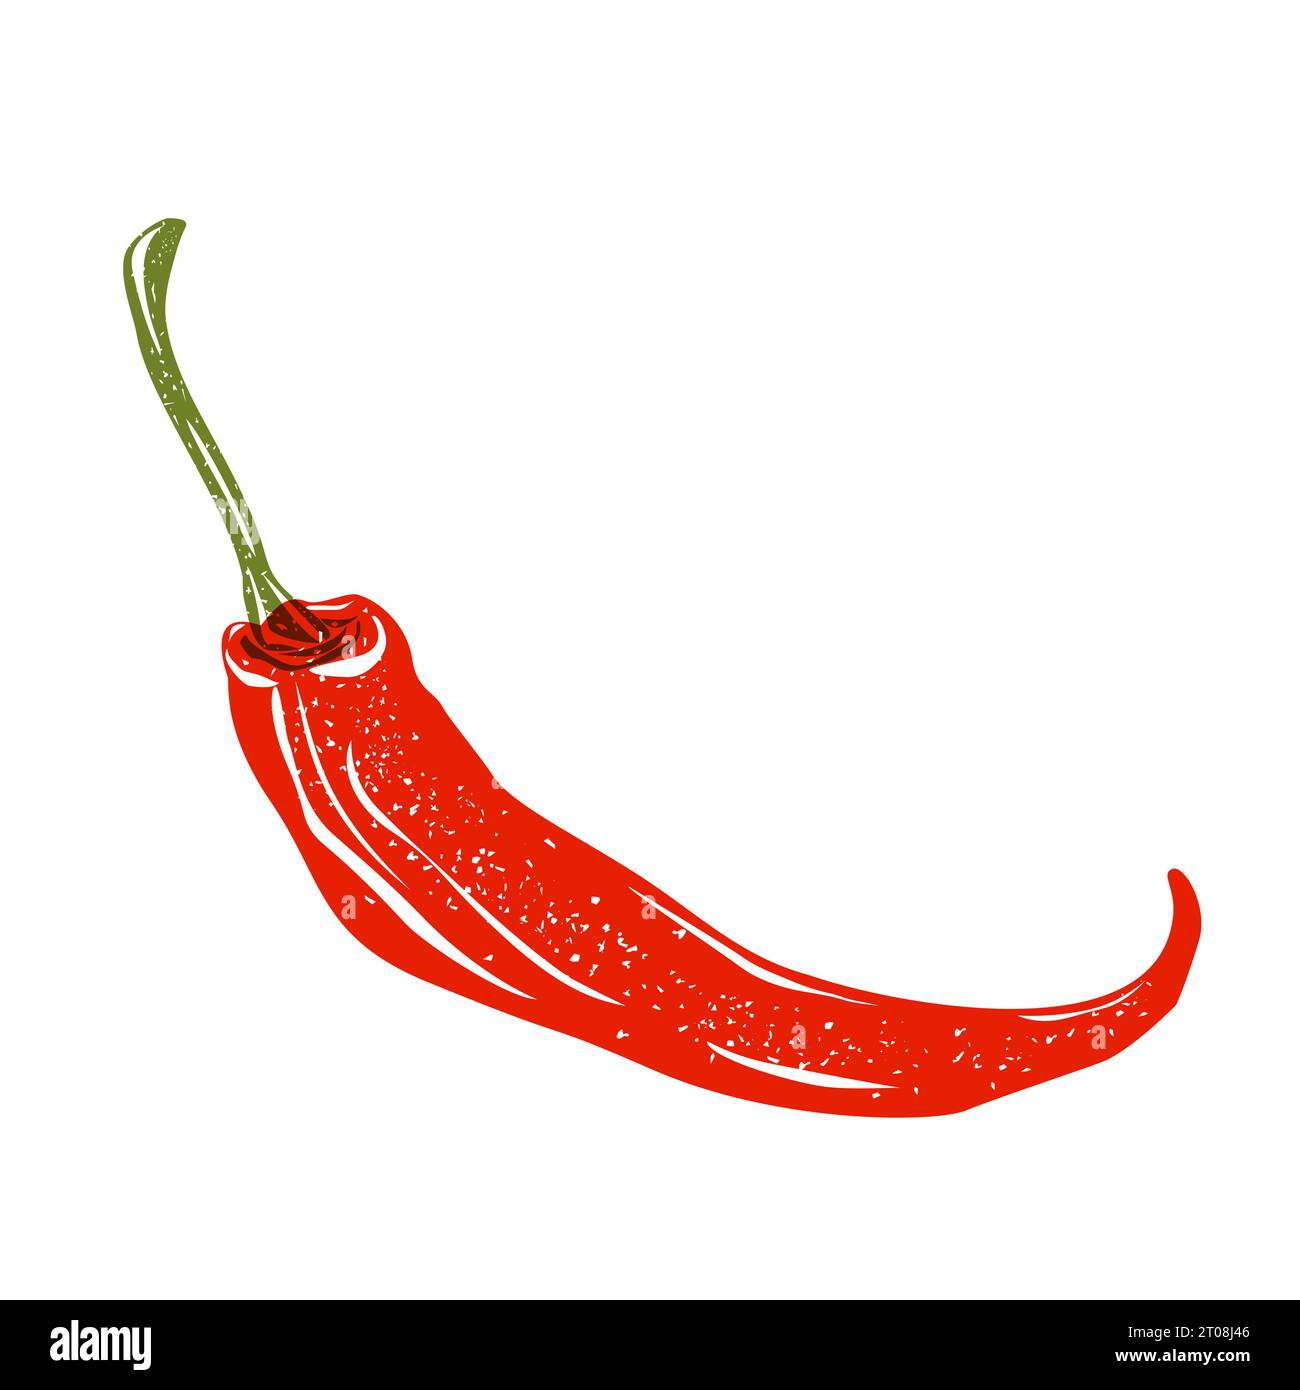 Red hot pepper chili on a white background. Riso print effect. Illustration for textile print design. Screen-cut print of hot pepper red image. Stock Vector